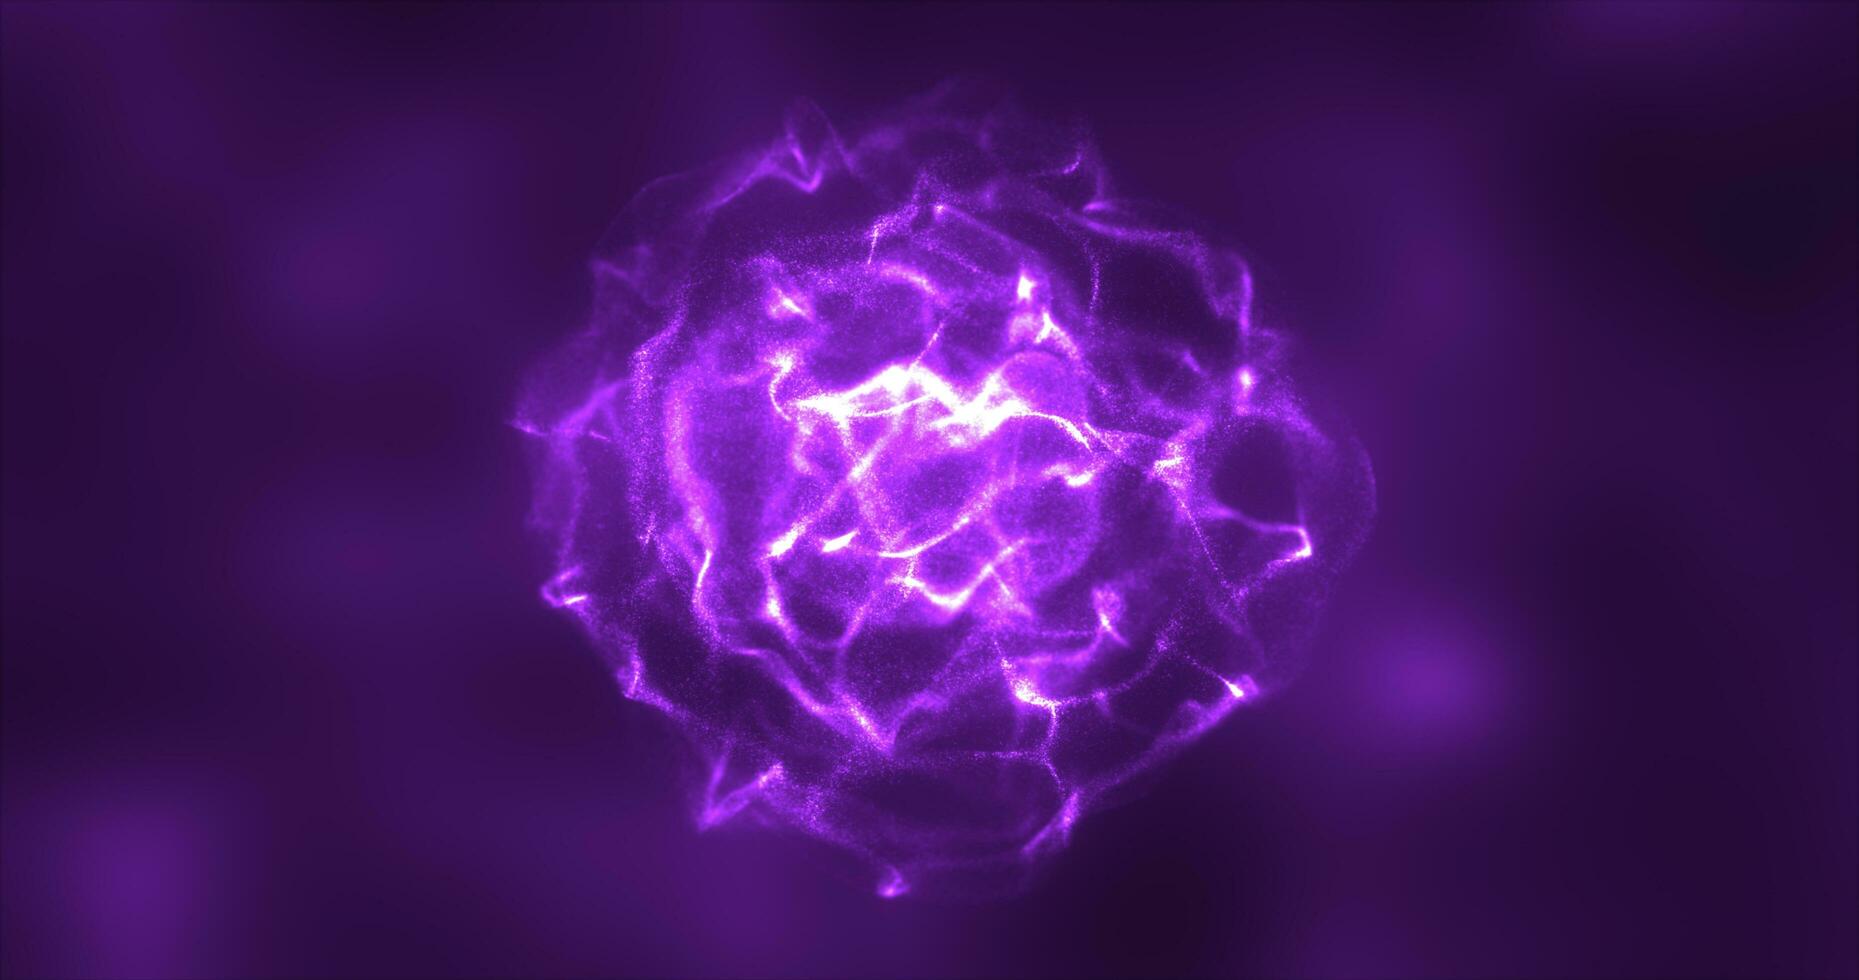 Abstract purple energy round sphere glowing with particle waves hi-tech digital magic abstract background photo